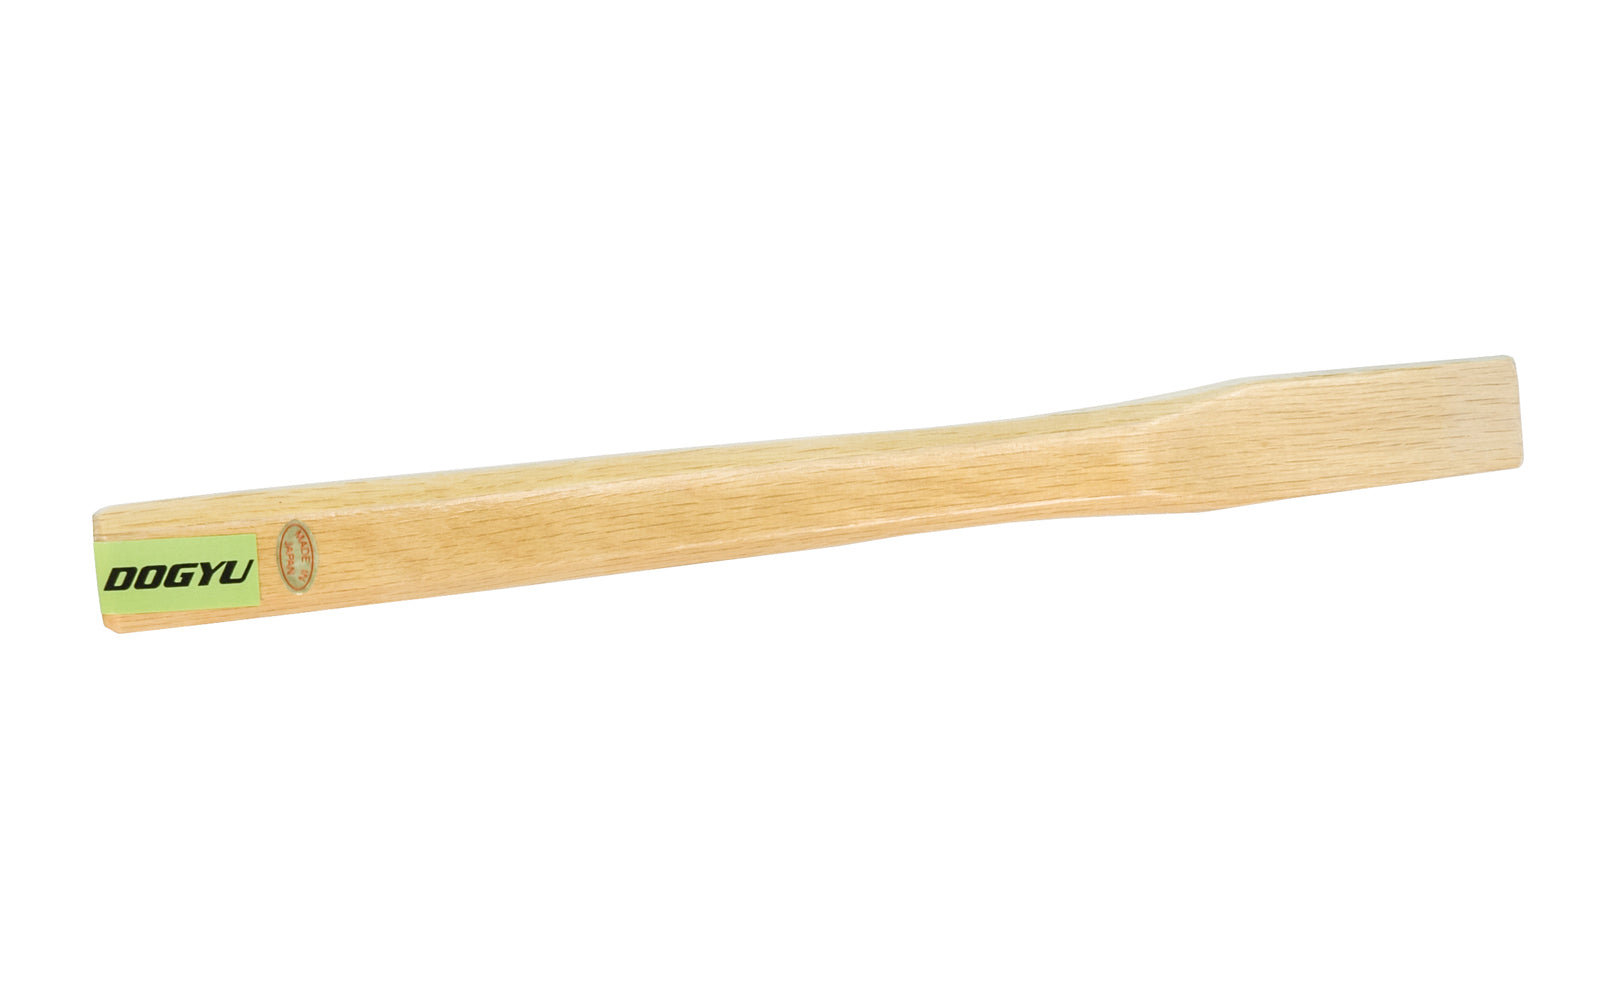 Replacement handle for the Japanese Dogyu Genno Hammer - 375 g / 450 g model. Wooden handle is made of Japanese White Oak.   Made in Japan.   Made in Japan. 4962819003794. Model 003794. 